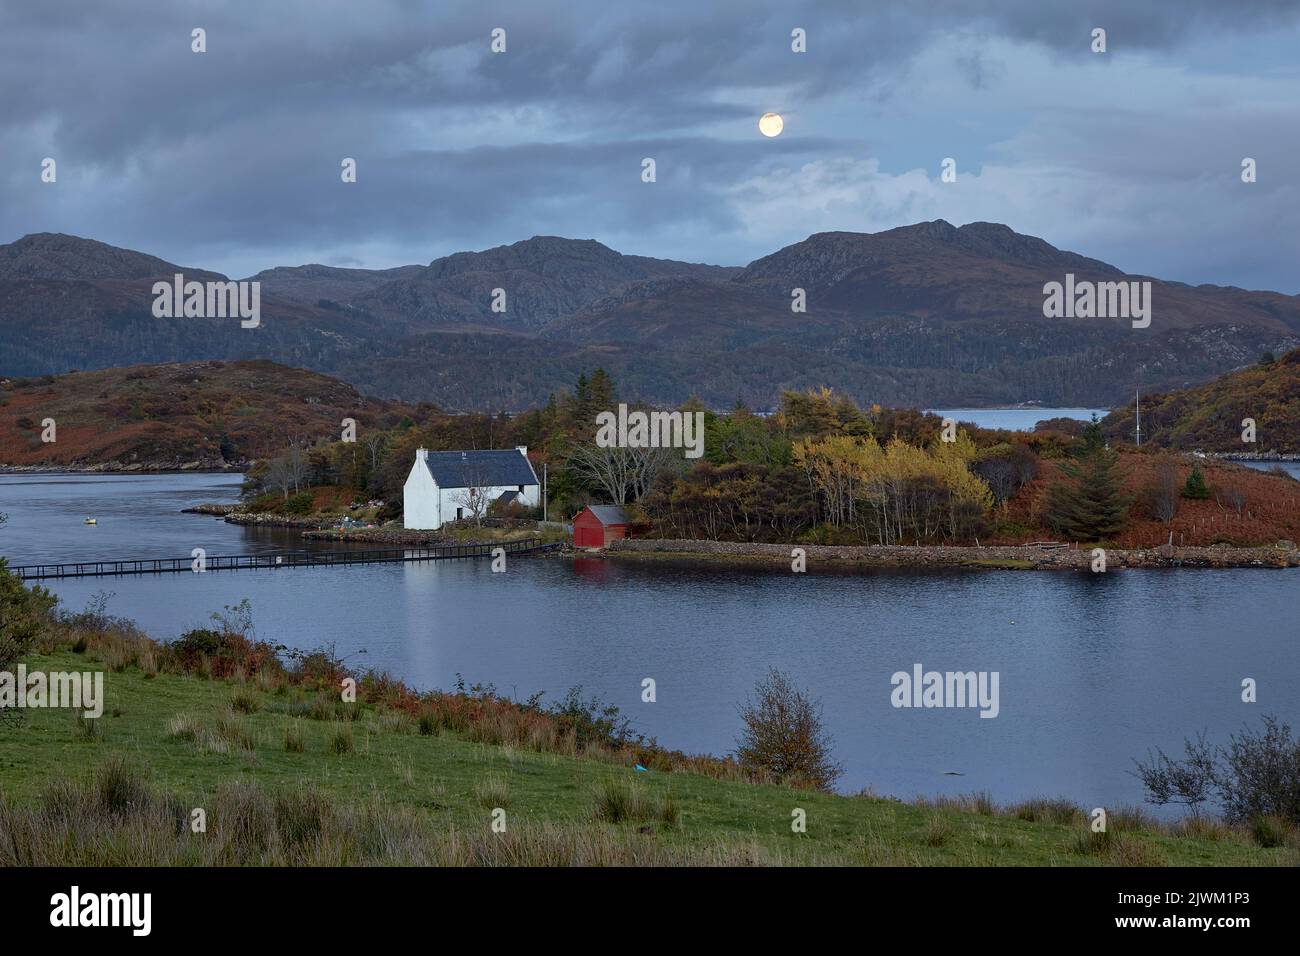 View of Dry-Island by moon light, Bedachro, Scotland. Stock Photo